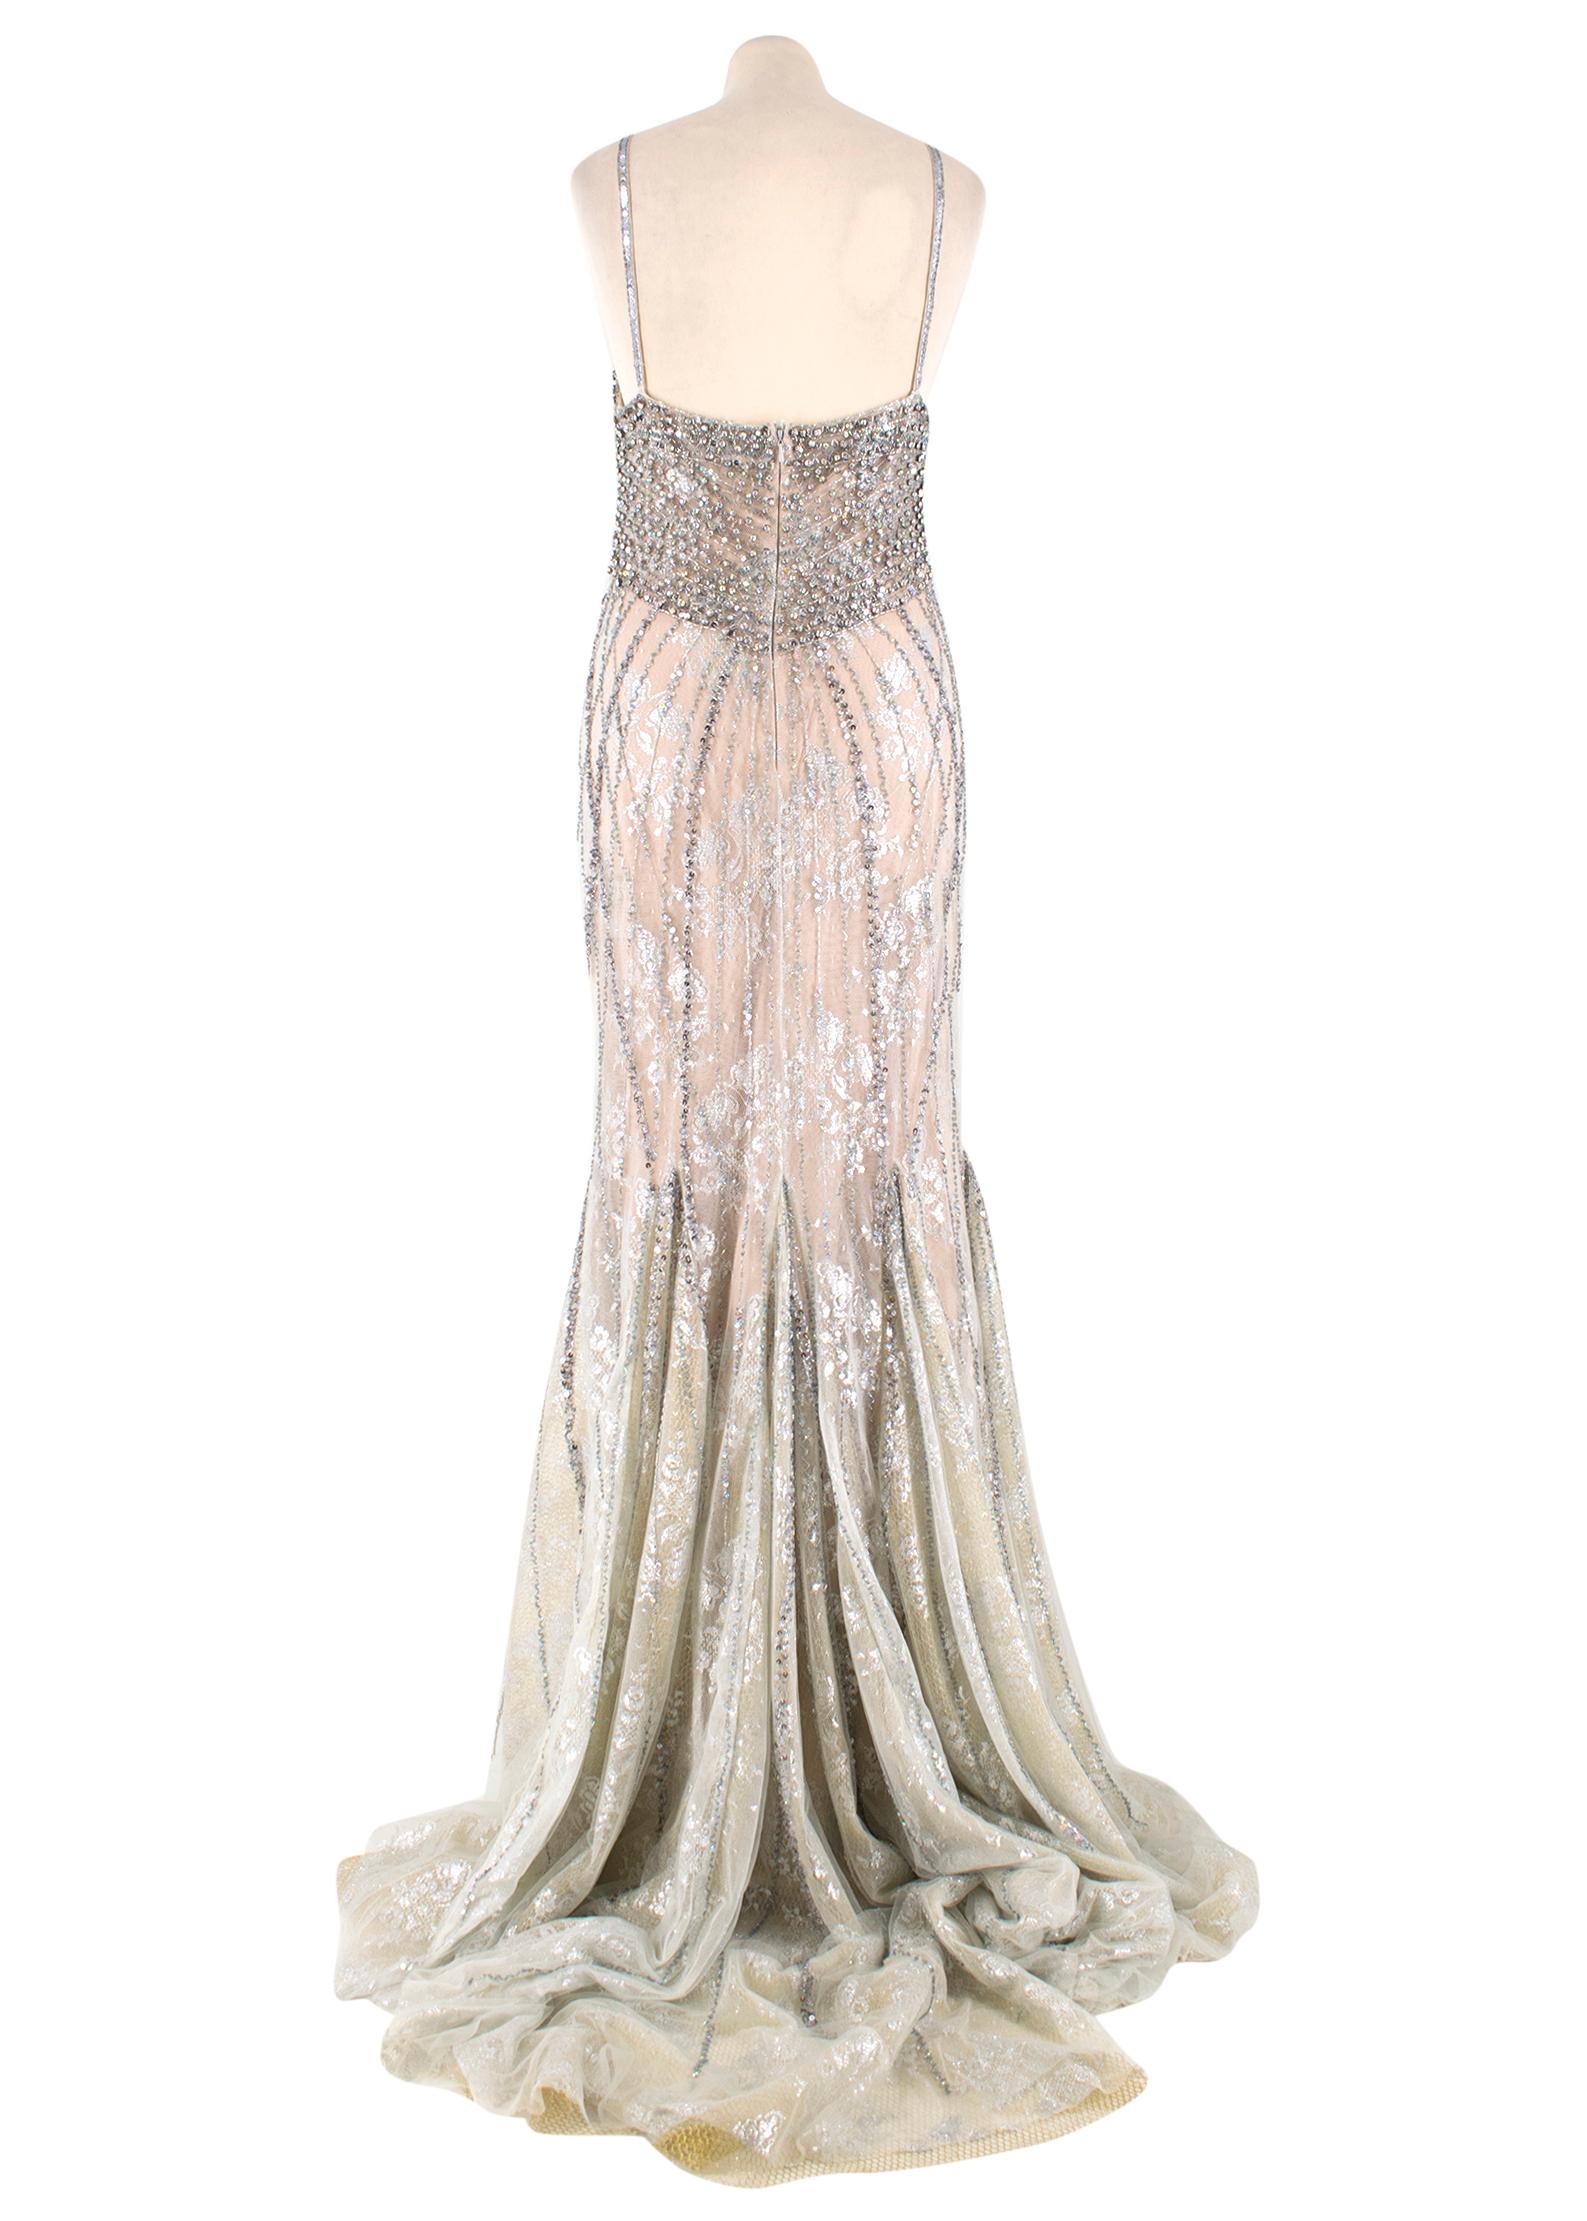 Bespoke Crystal Embellished Lace Gown

-Sheer lace dress with nude lining underneath 
-Padded Bust
-Fishtail skirt with train
-Crystal embellishment around bust which disperses down the dress
-V neck with crystal embellished spaghetti straps
-Back